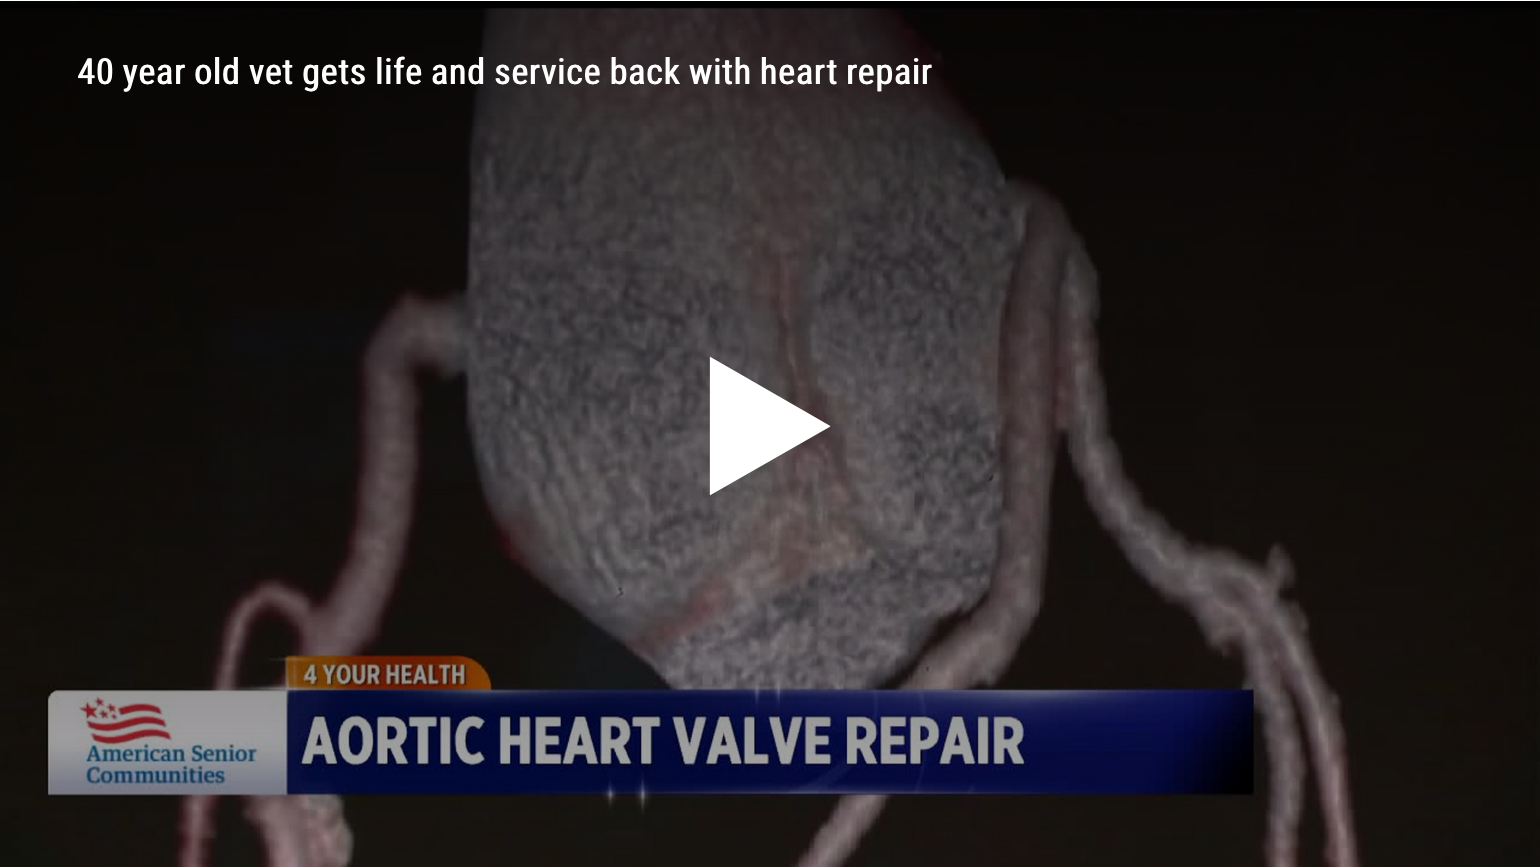 Article from WTTV-TV about 40-year-old Vet get life and service back with heart repair using the HAART 300